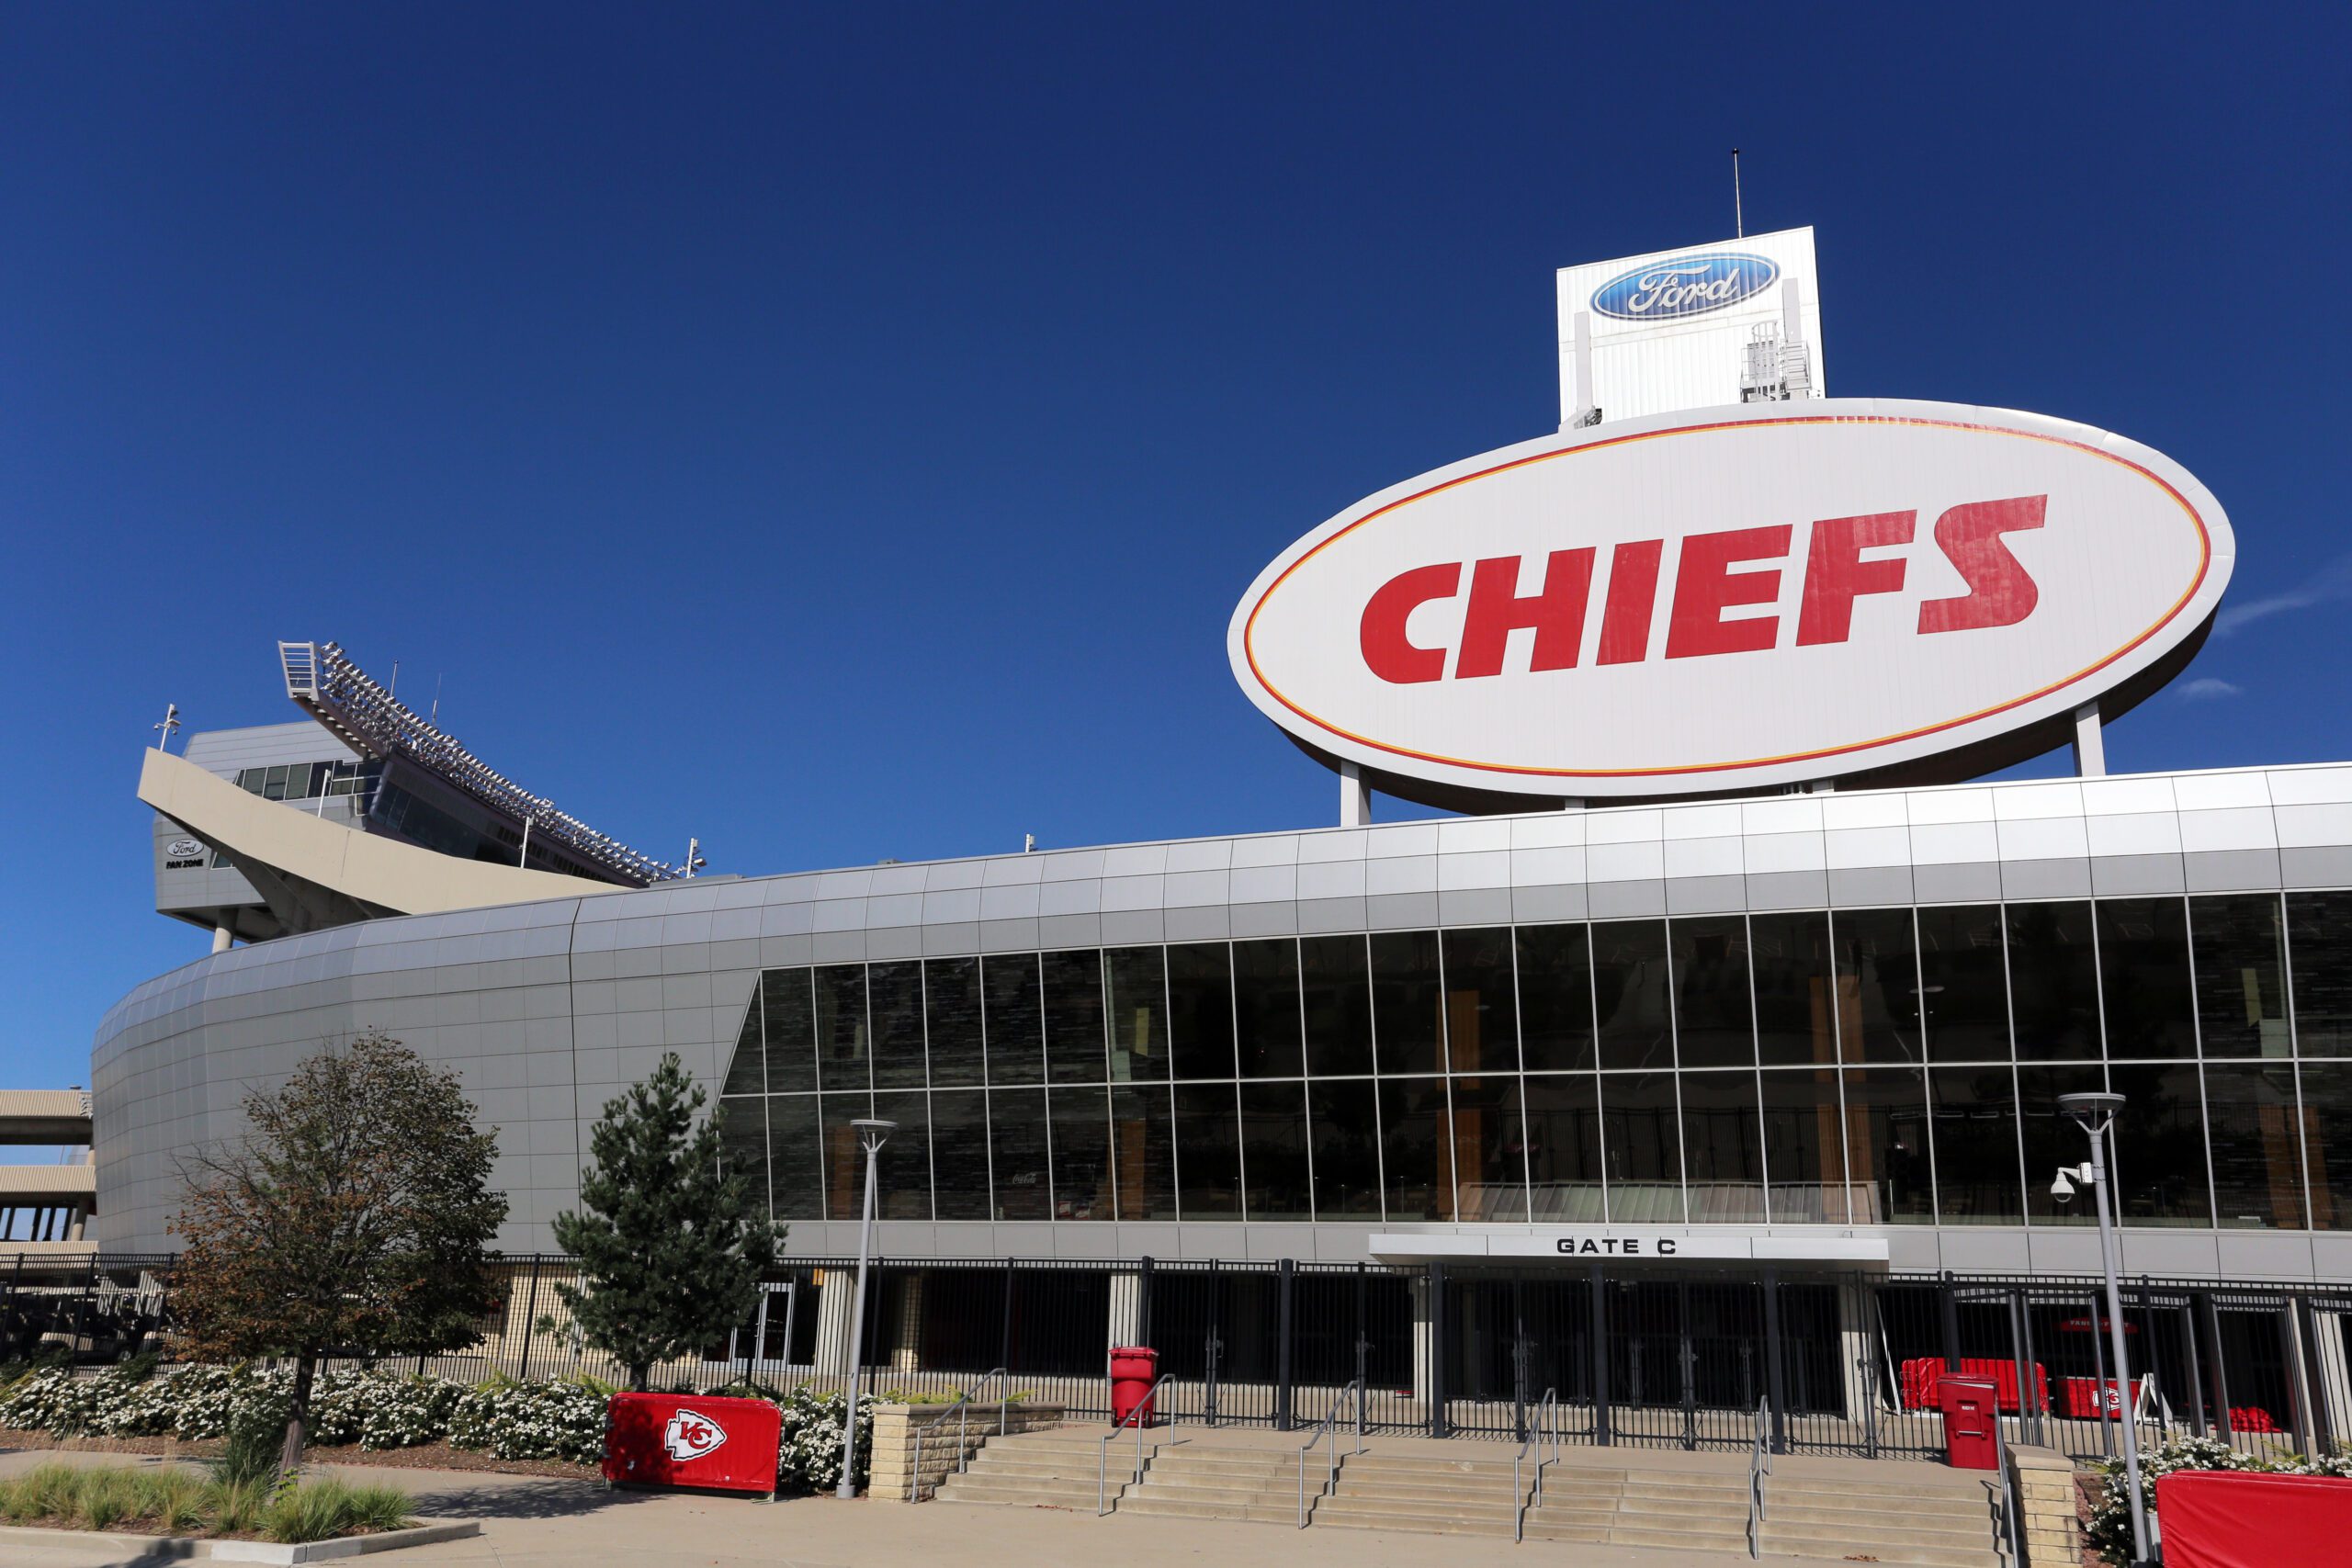 An exterior image of a business building with the Chiefs football team logo.